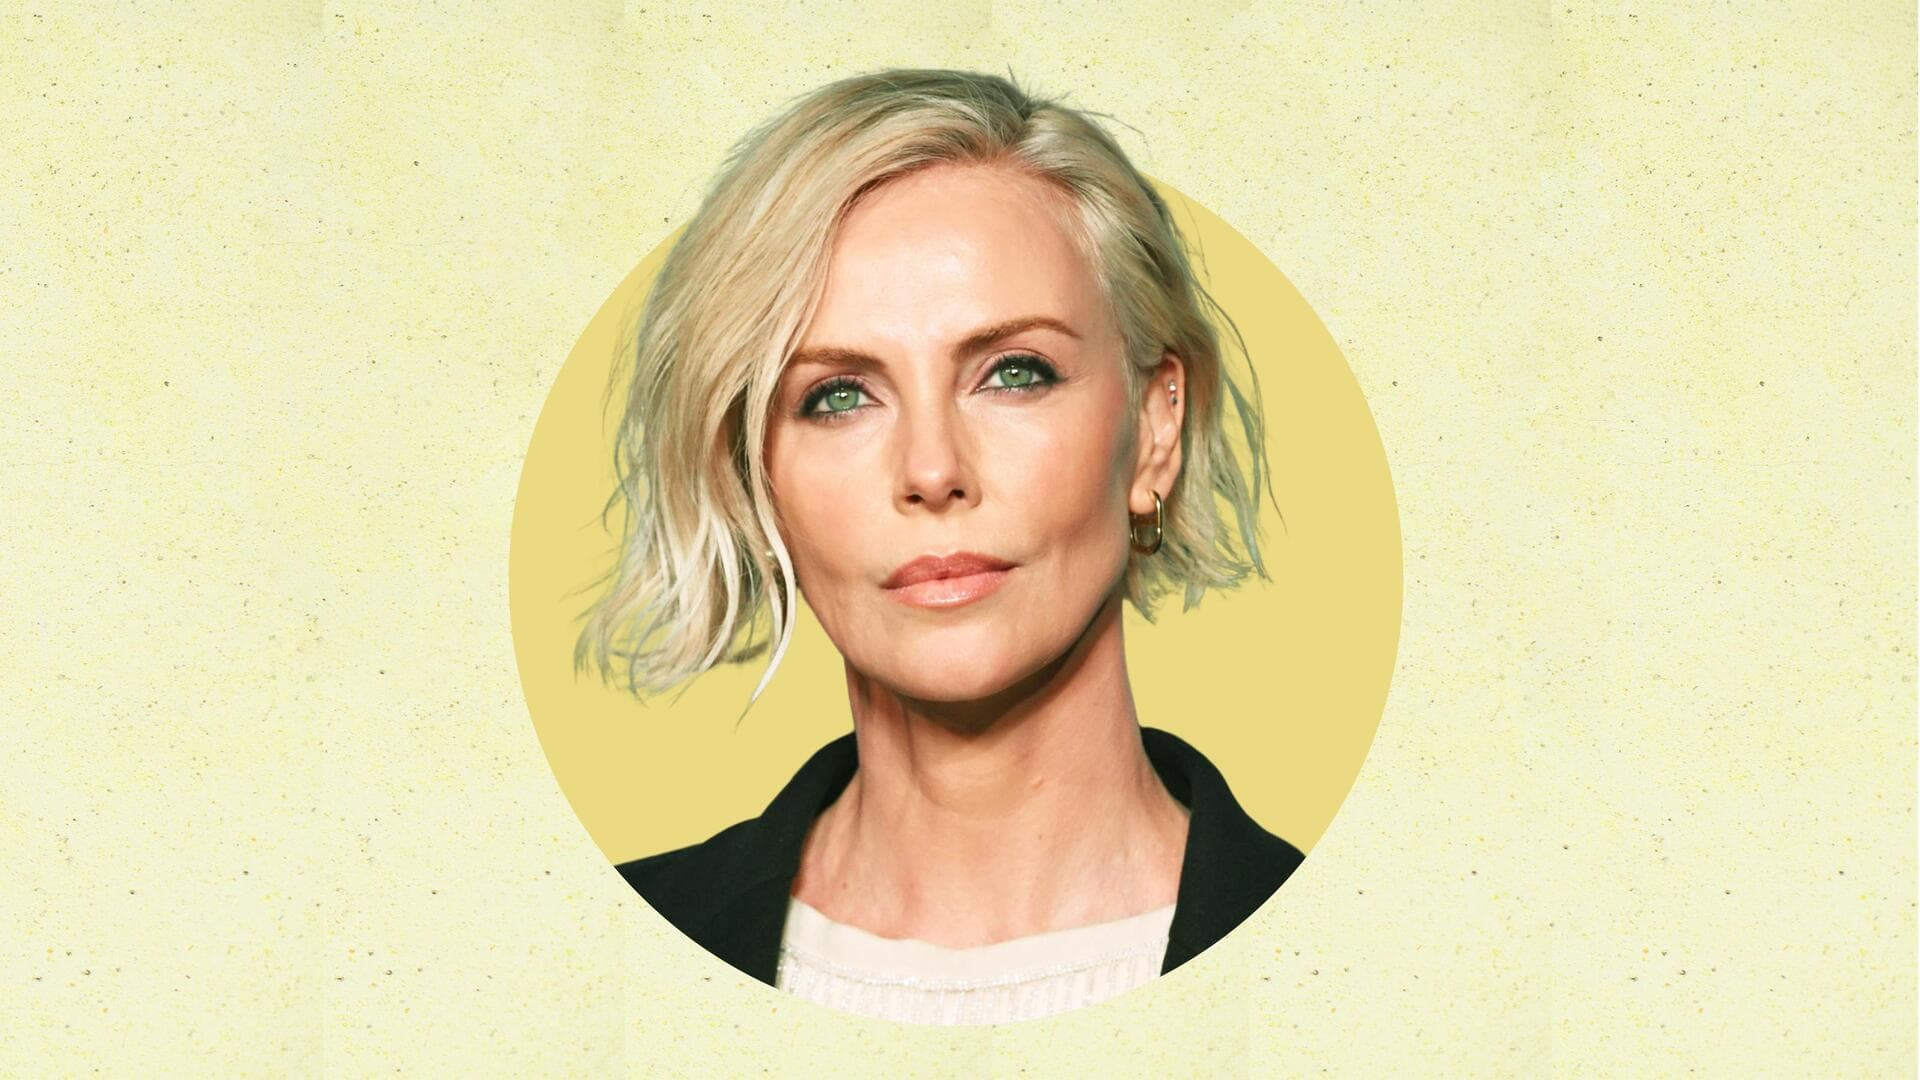 Charlize Theron birthday special: Actor's critically acclaimed films